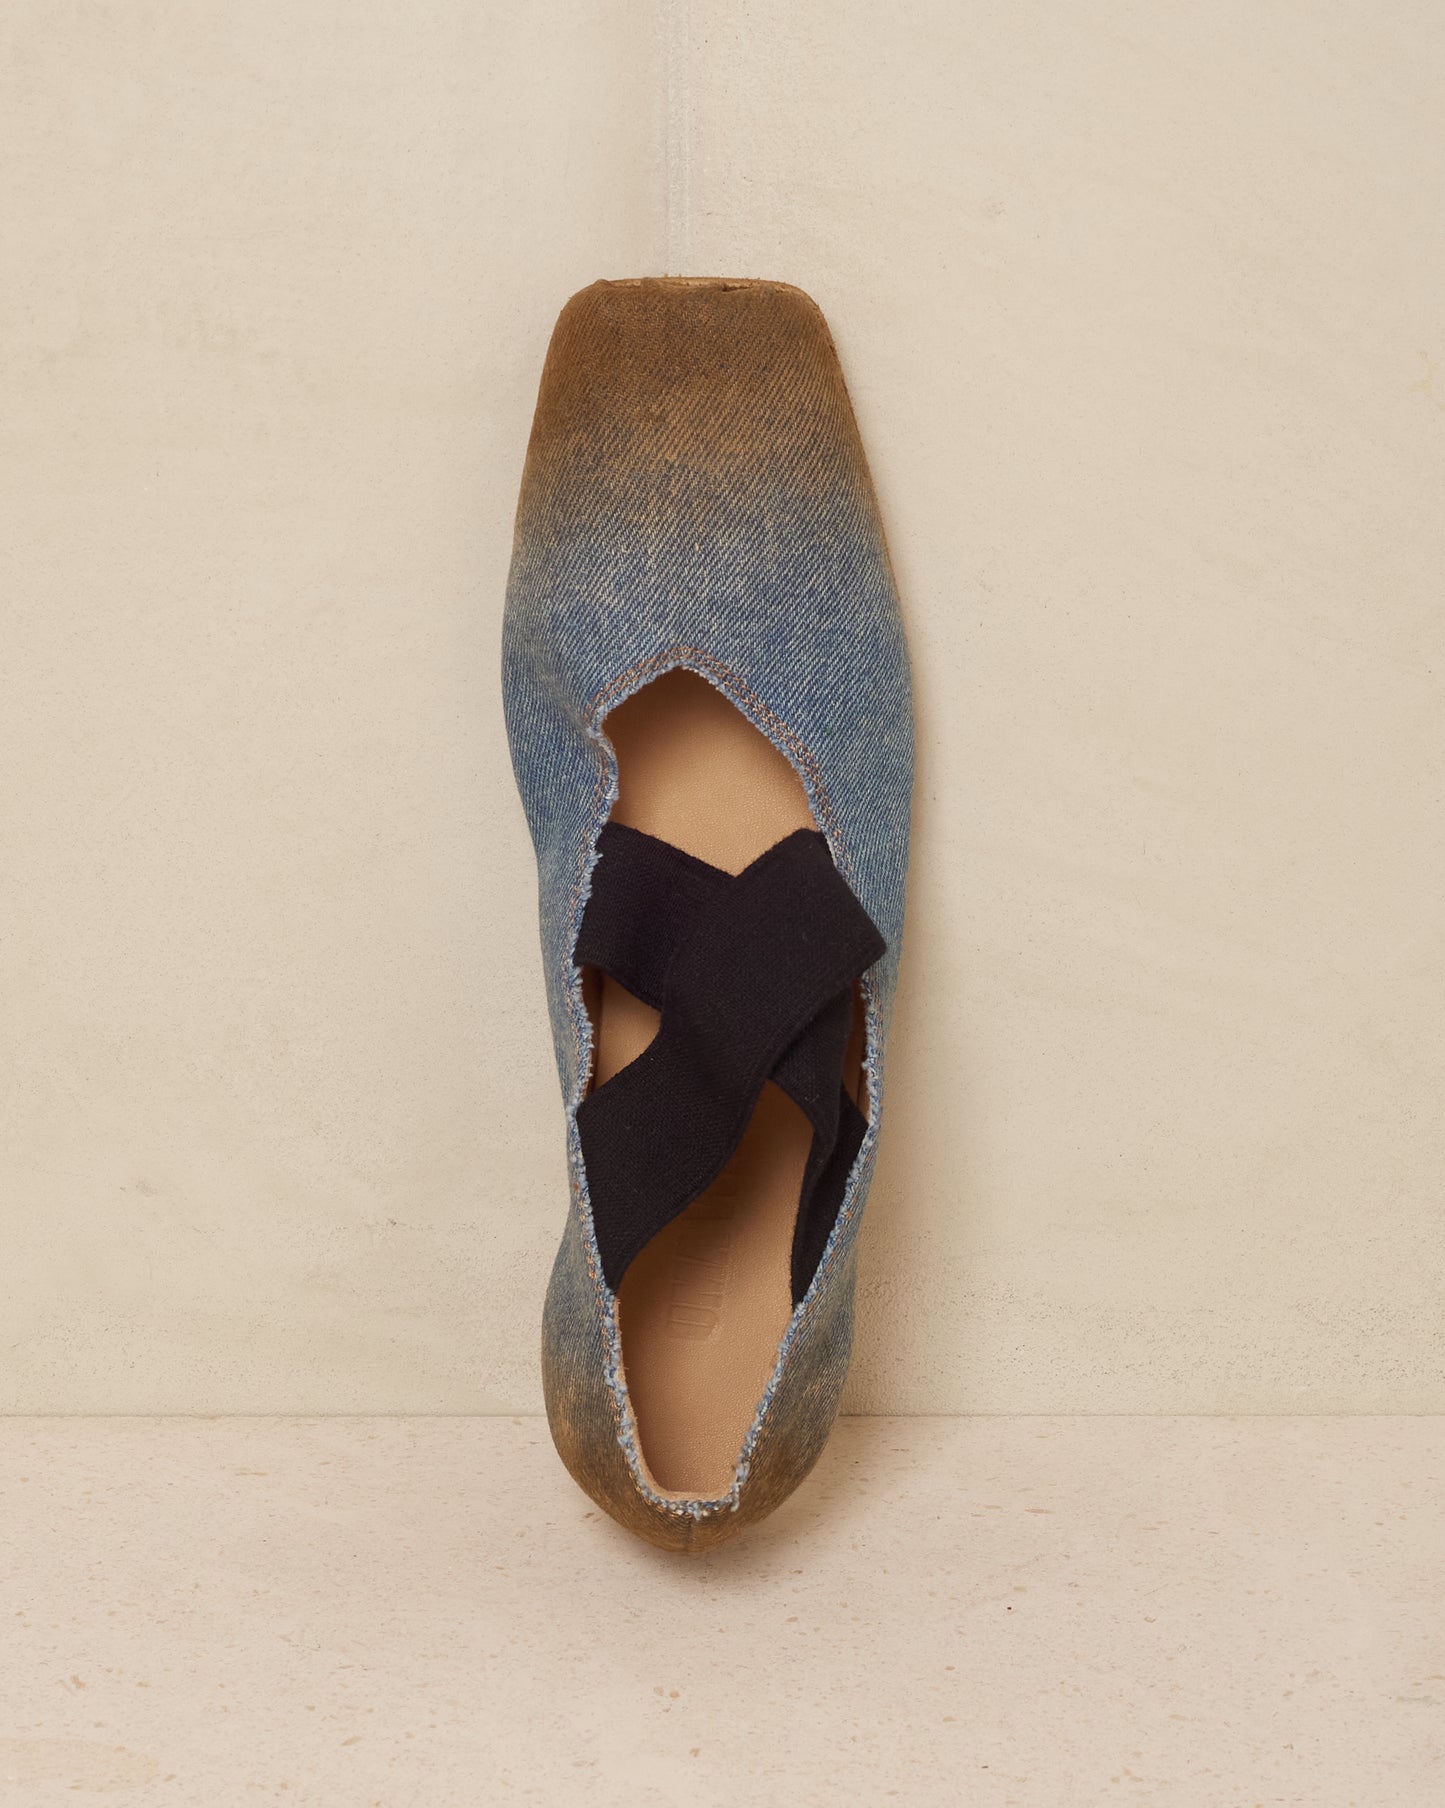 Blue and Brown Denim Ballet Shoes